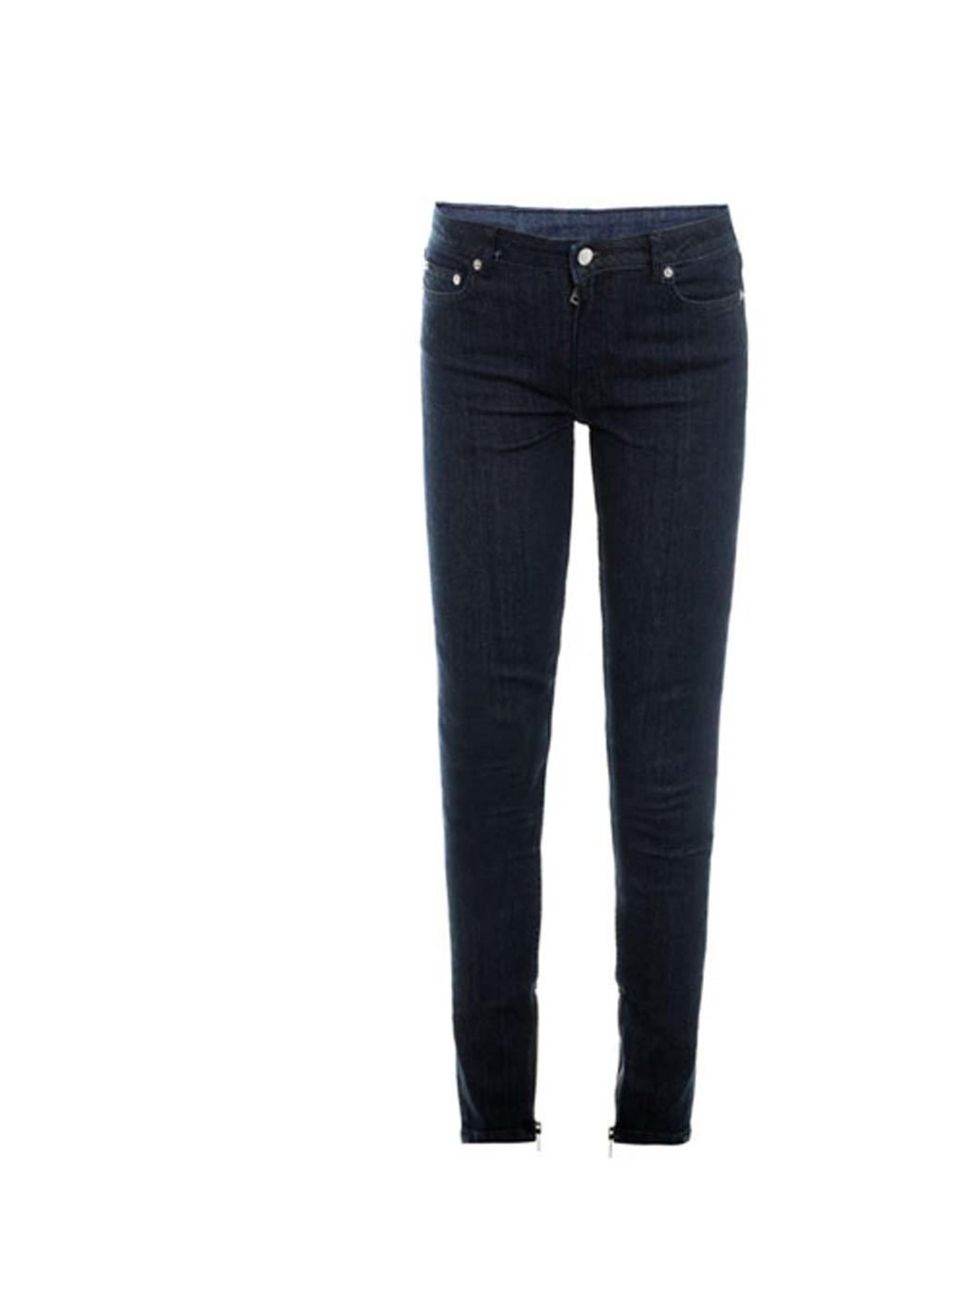 <p>BLK DNM zip ankle jeans £150 at <a href="http://www.matchesfashion.com/product/136620">Matches</a></p>